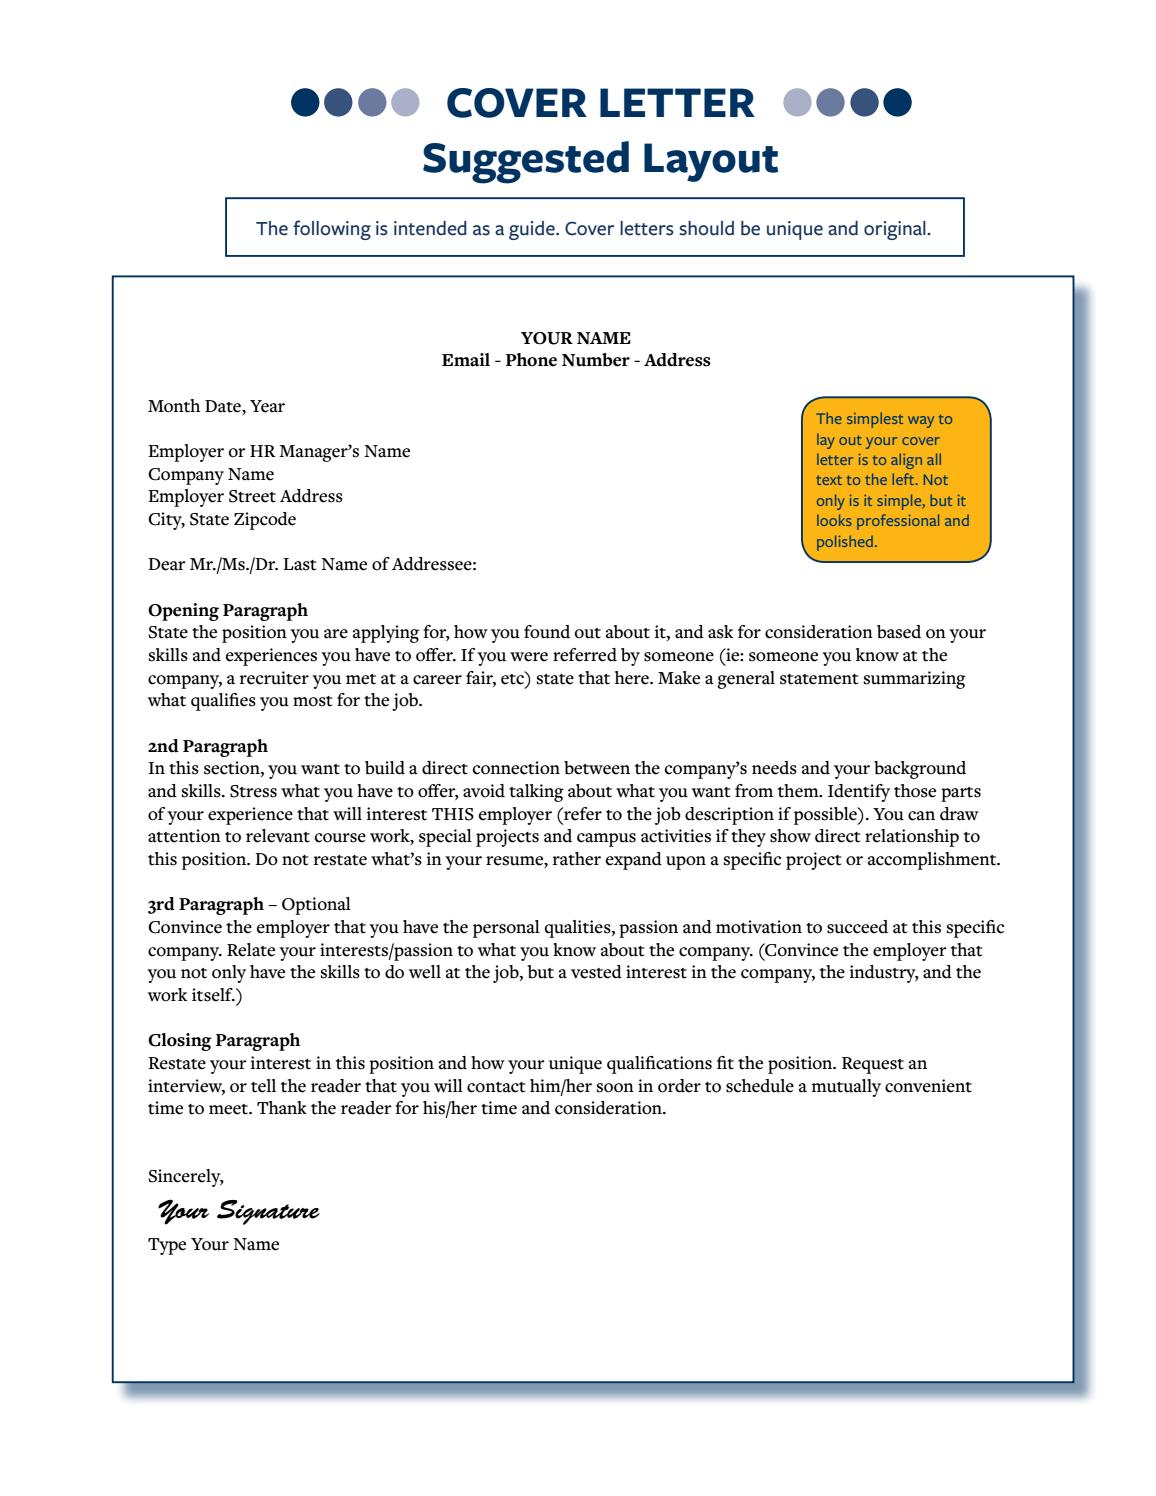 cover letter closing paragraph examples